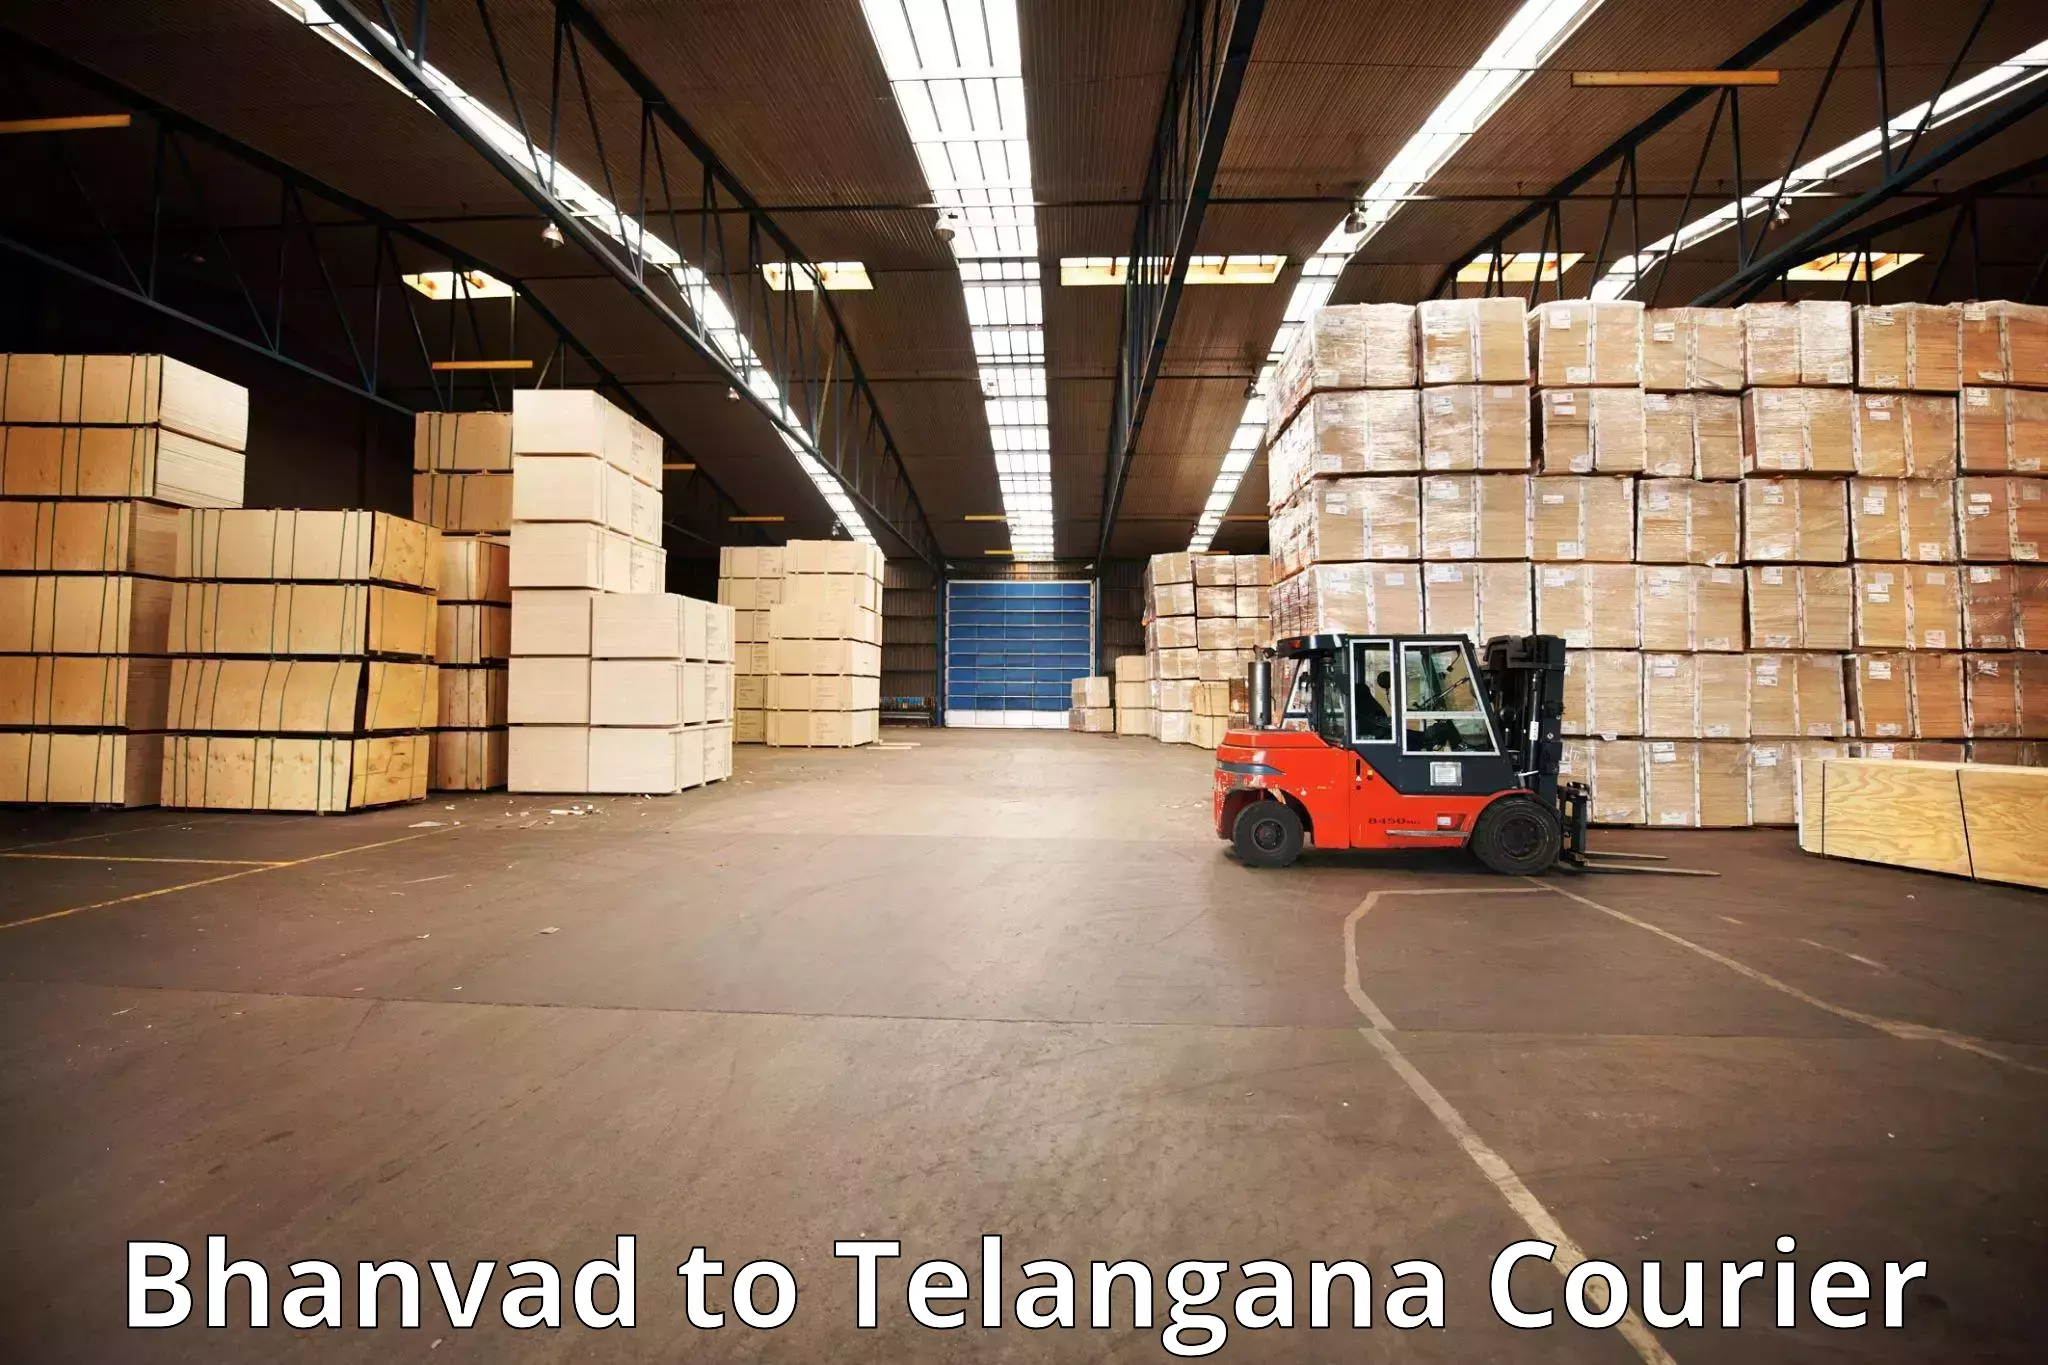 Luggage transport consultancy Bhanvad to Wanaparthy